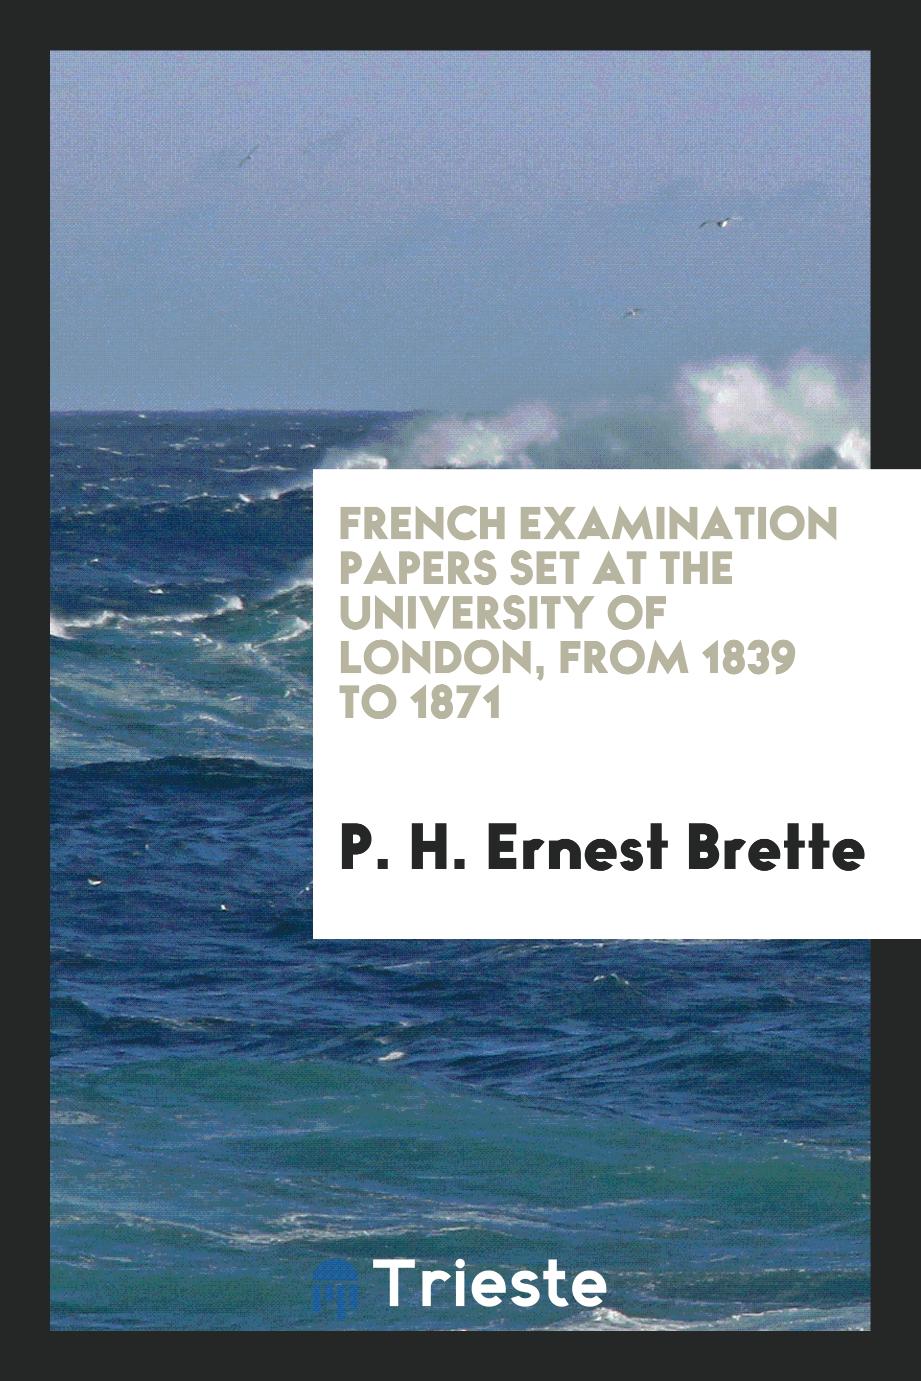 French examination papers set at the University of London, from 1839 to 1871